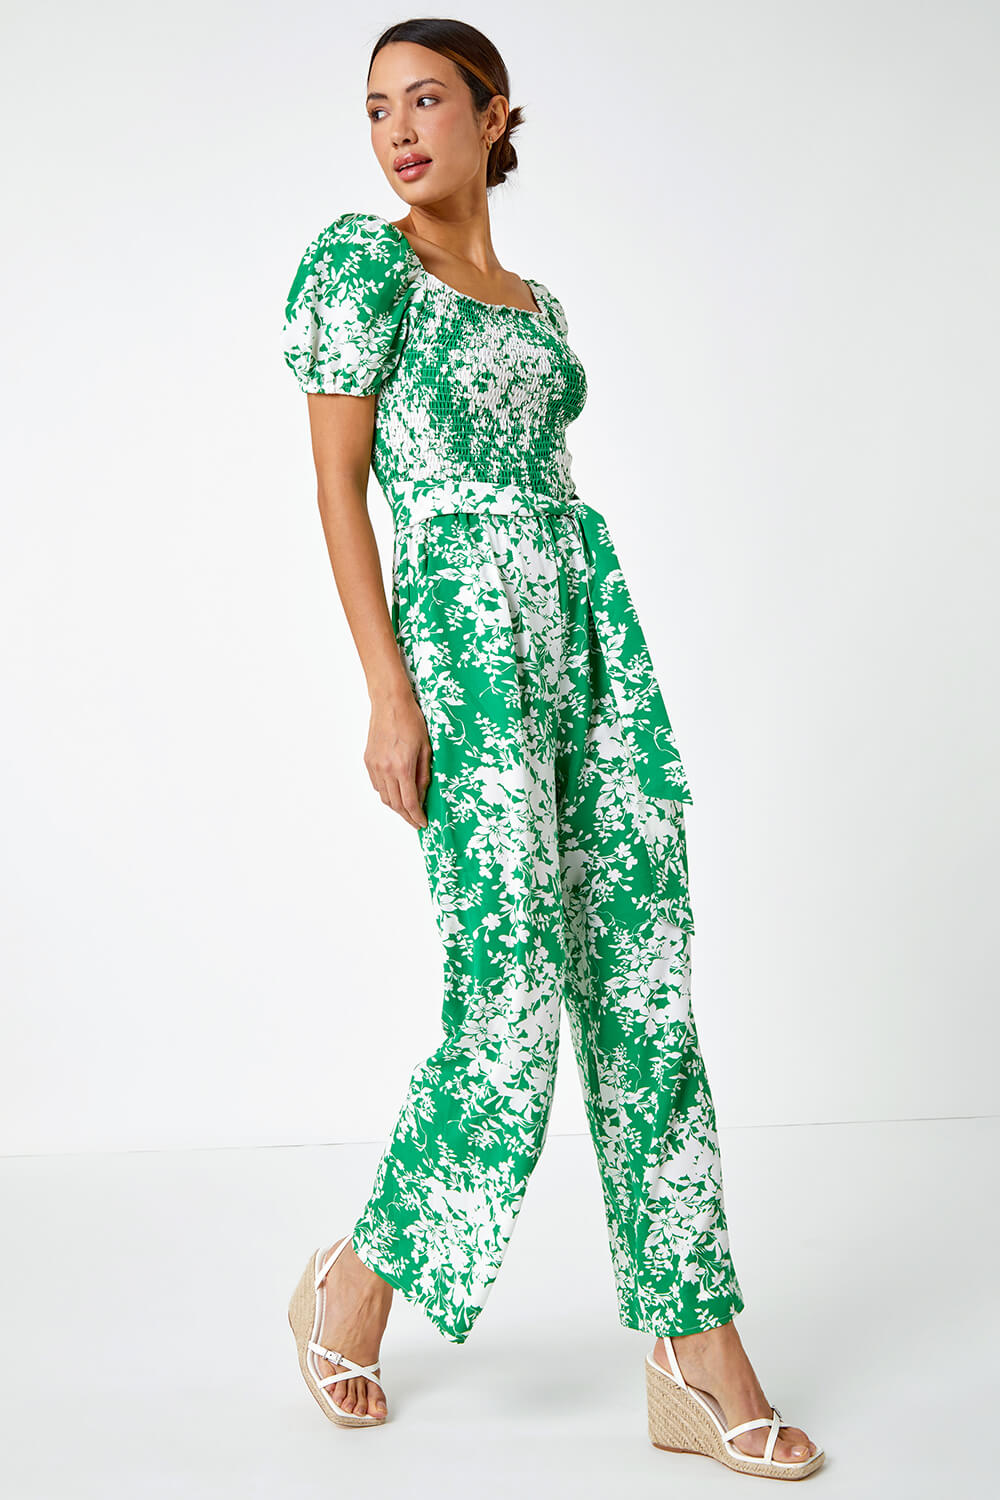 Green Ditsy Floral Stretch Shirred Jumpsuit, Image 2 of 5